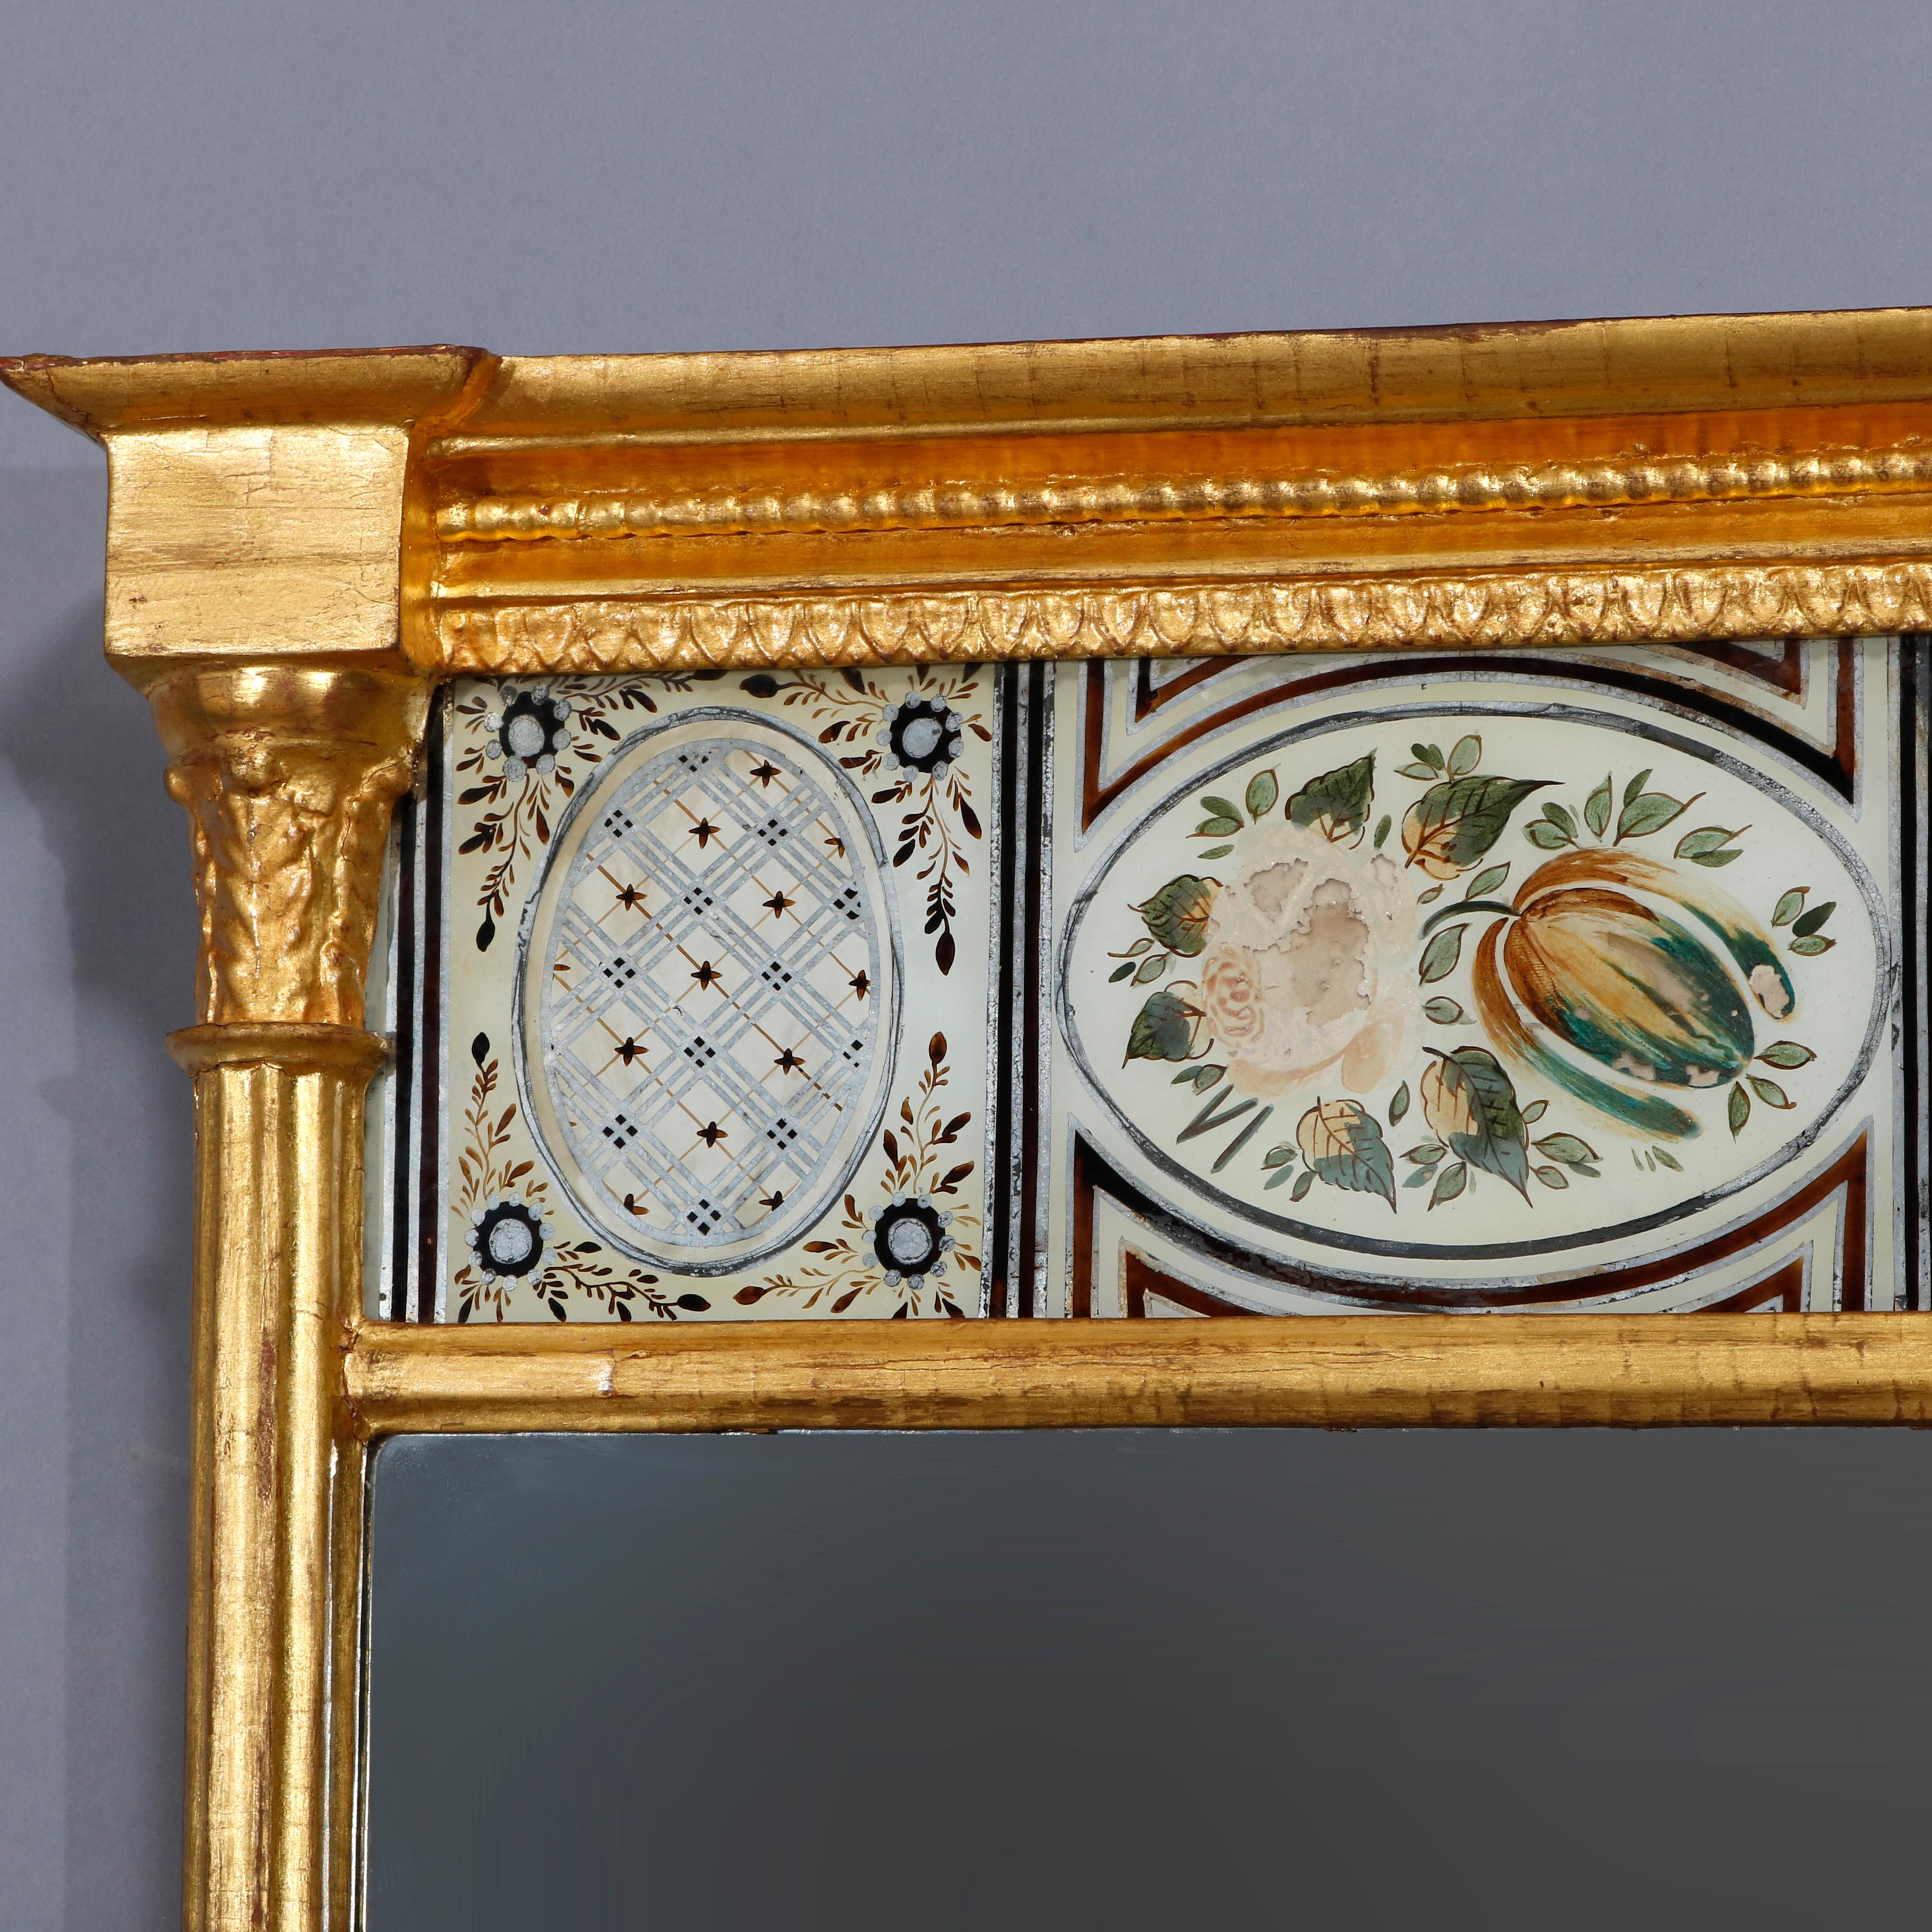 An antique French Empire trumeau wall mirror offers giltwood frame having flanking Corinthian columns with acanthus capitals, upper floral painted églomisé glass panel and lower mirror panel, 19th century.

Measures: 31.63